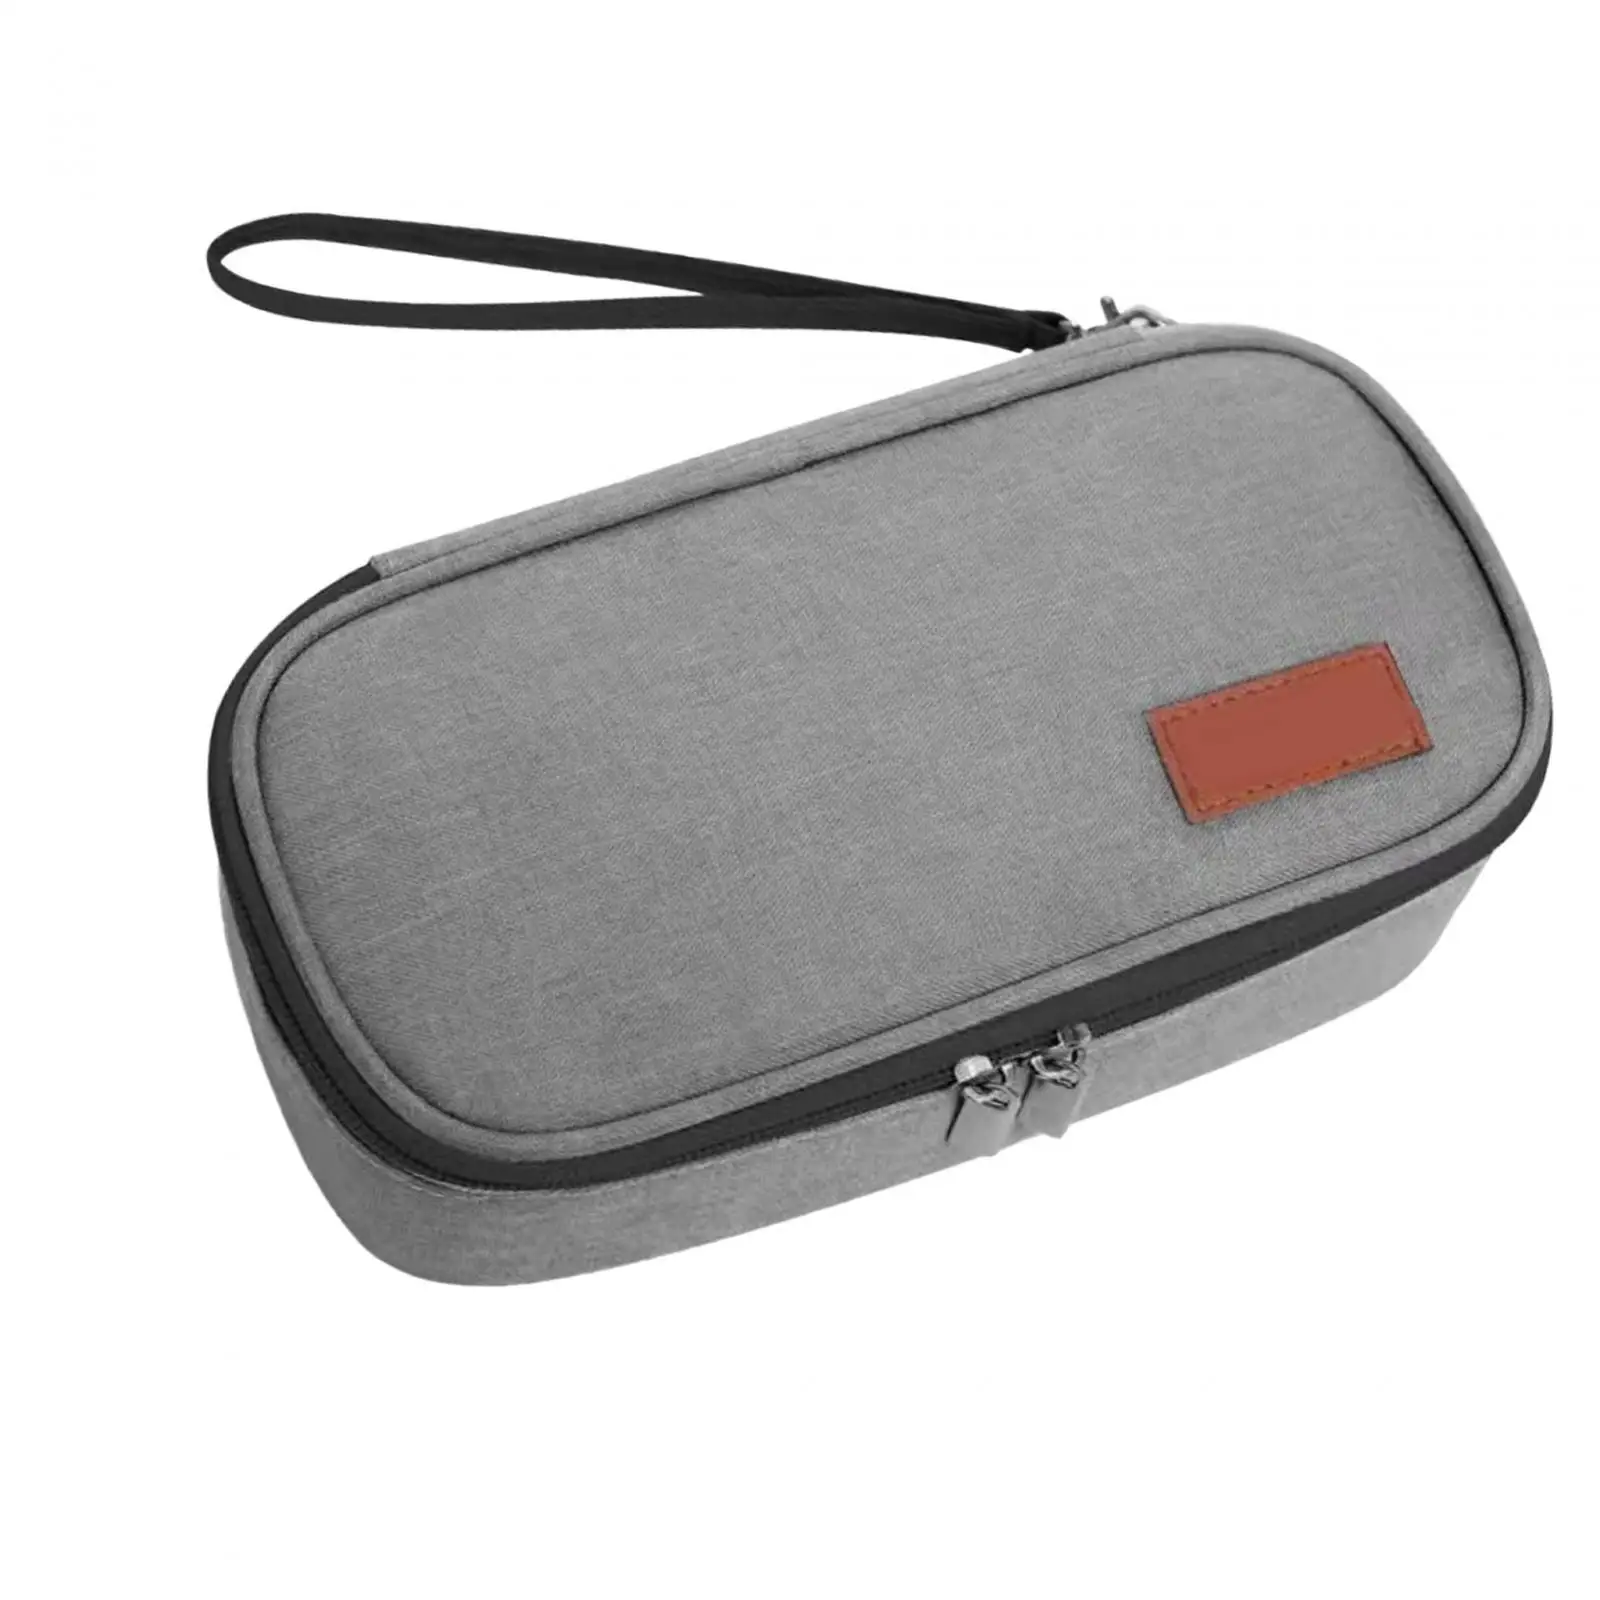 Cooler Travel Case Protective Aluminum Foil Keep Cool Insulated Carrying Case Waterproof for Home Office Outdoor Indoor